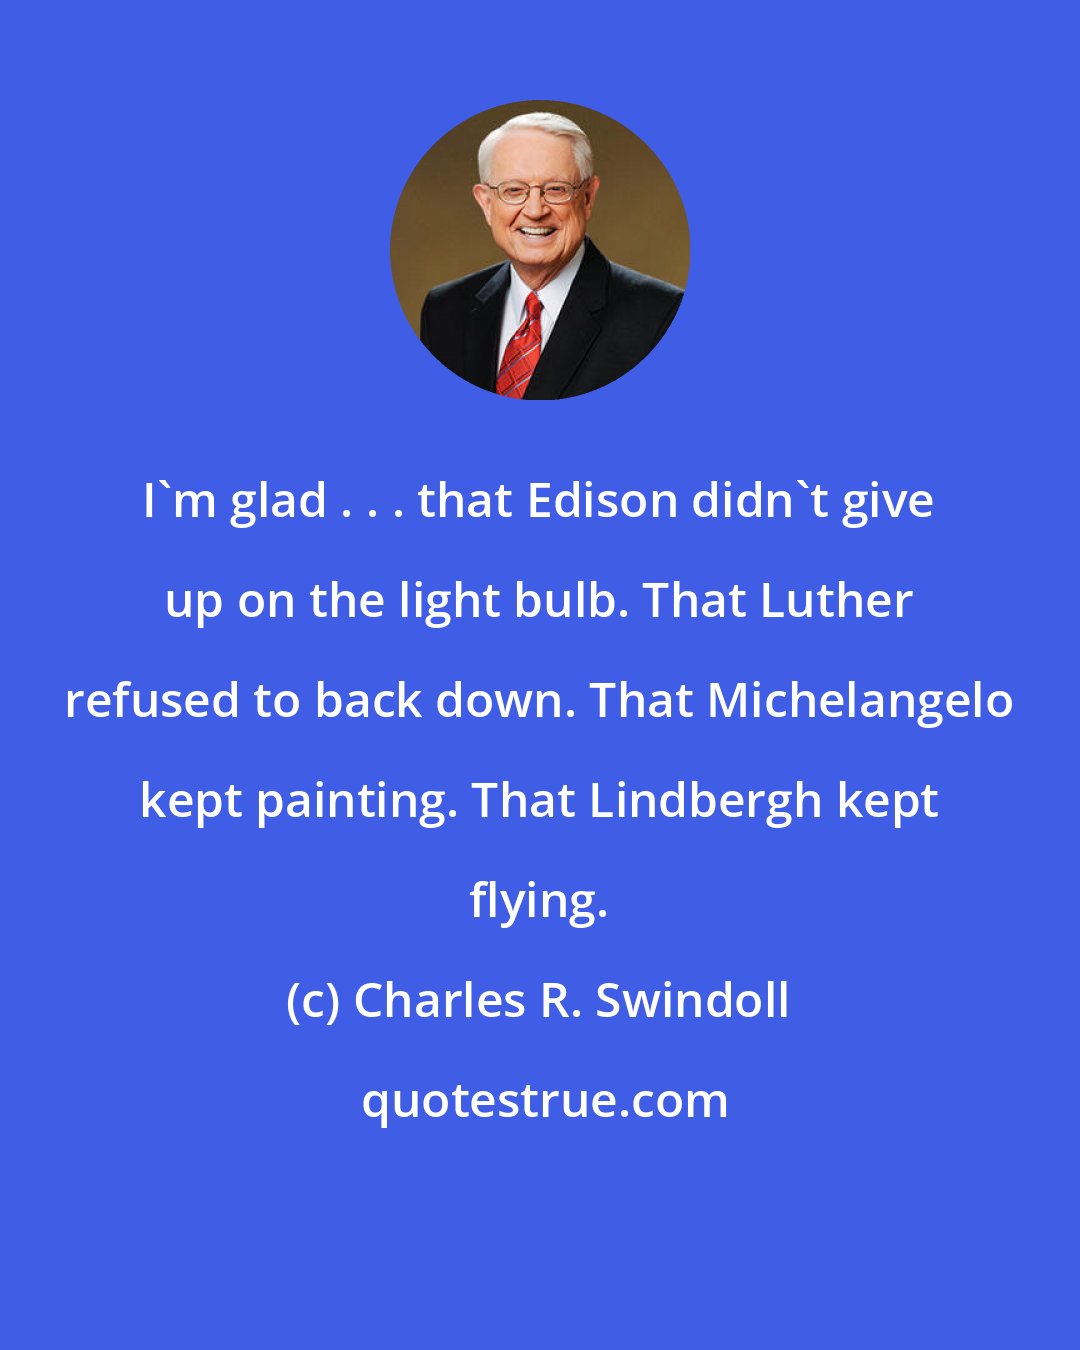 Charles R. Swindoll: I'm glad . . . that Edison didn't give up on the light bulb. That Luther refused to back down. That Michelangelo kept painting. That Lindbergh kept flying.